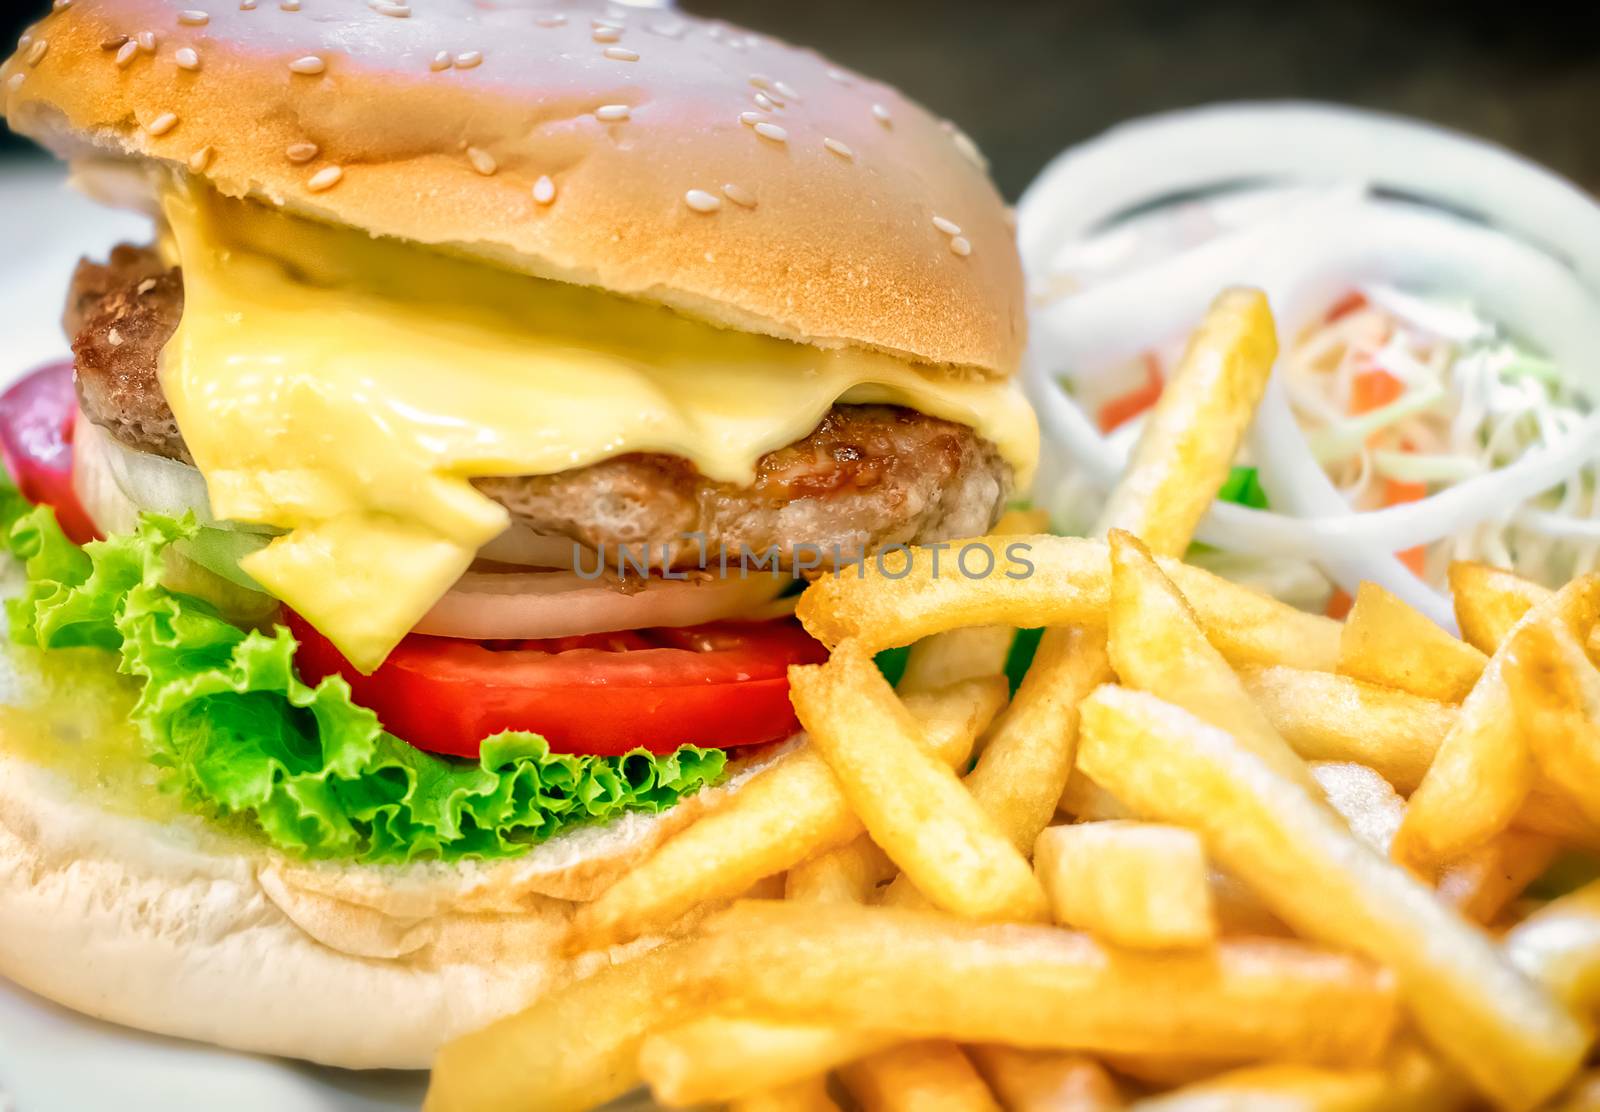 Delicious Homemade Cheeseburger with French Fries and Onion Salad